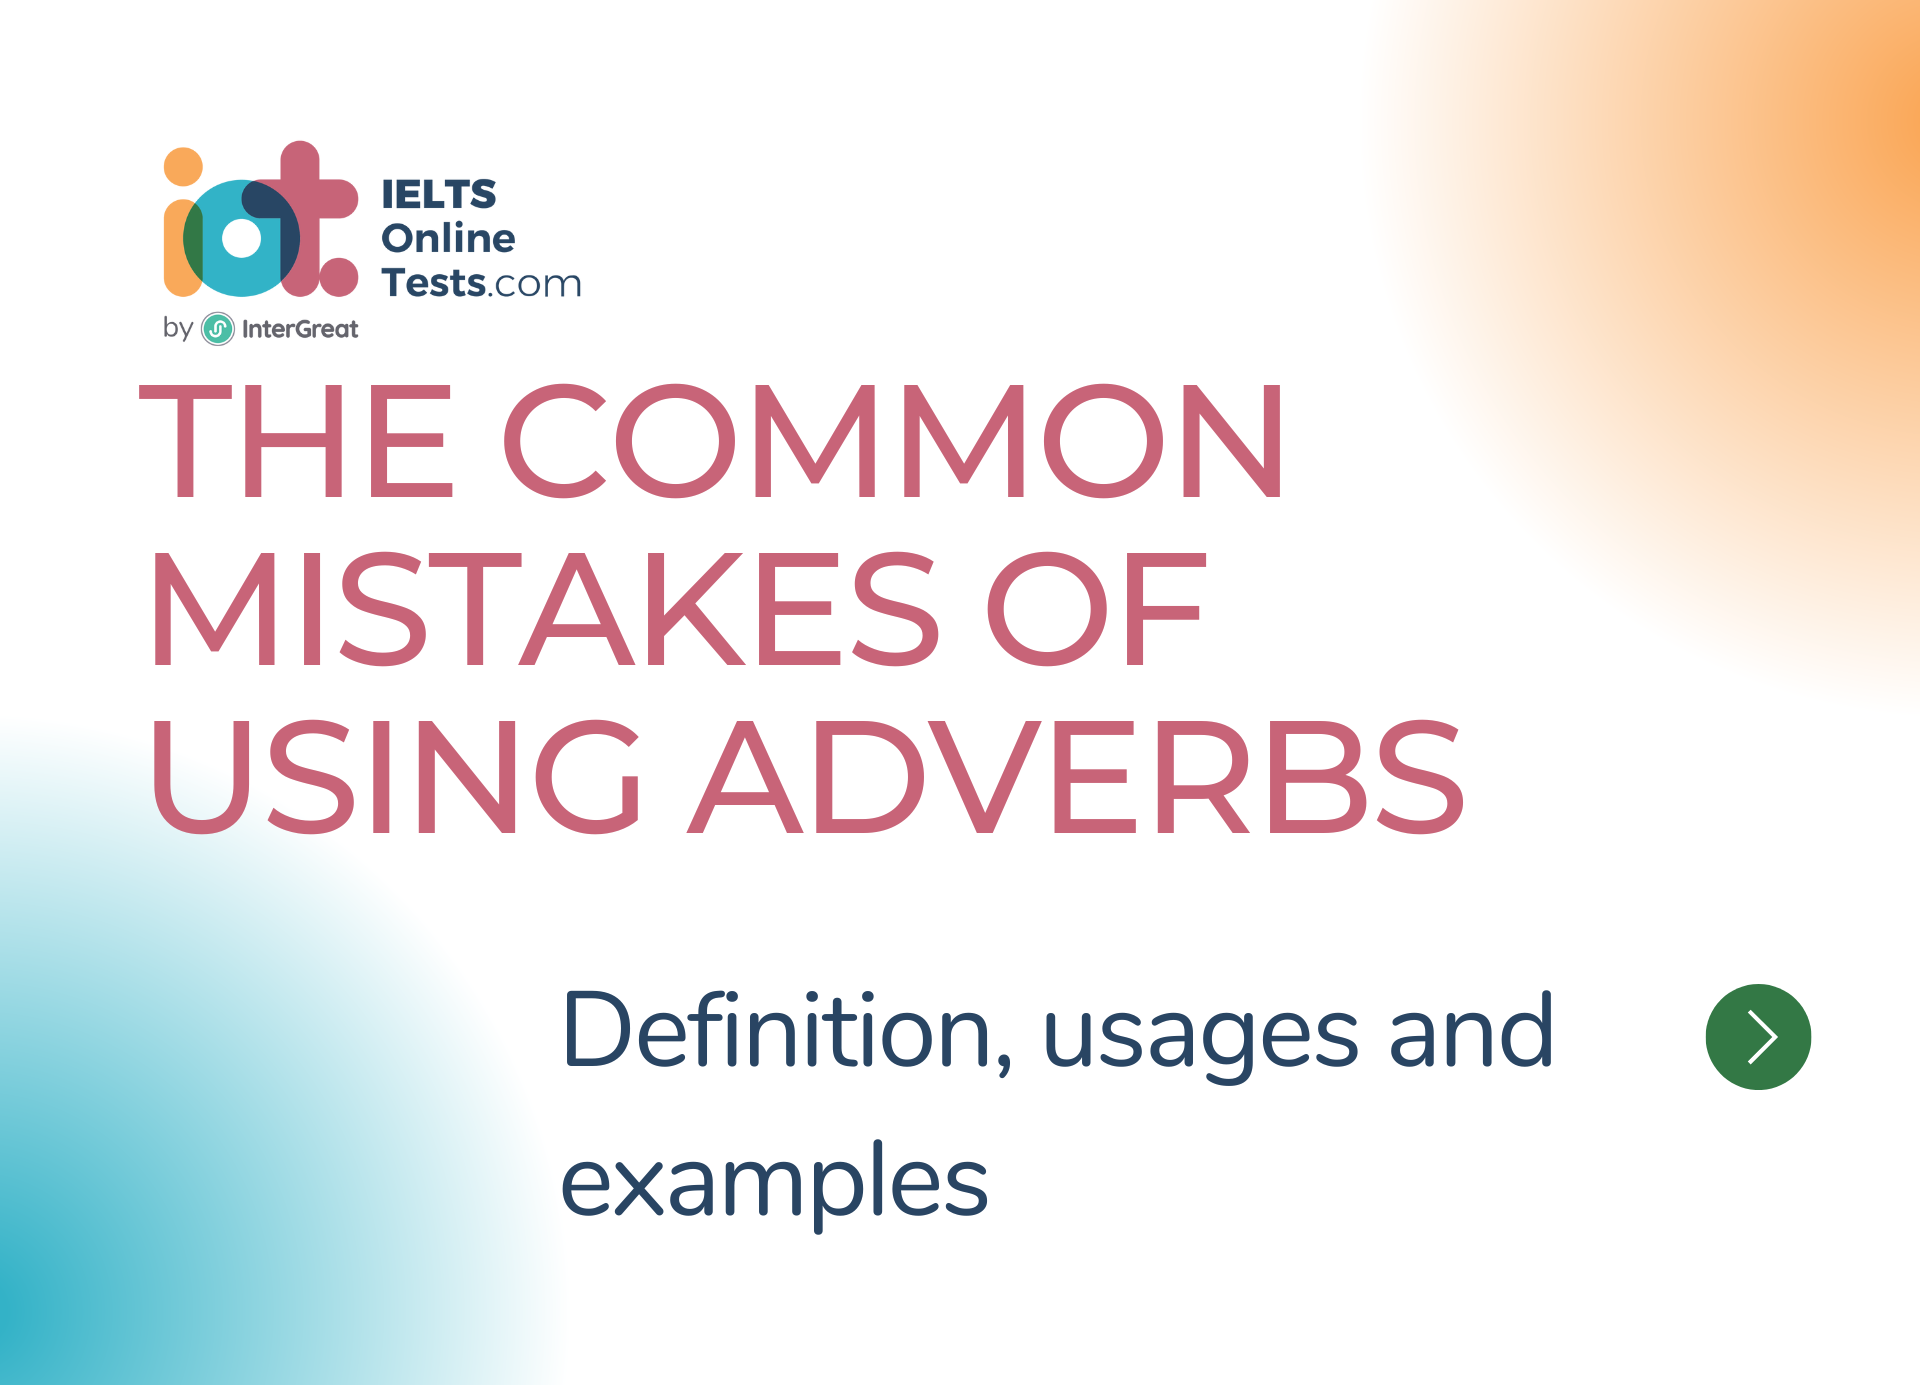 The common mistakes of using adverbs